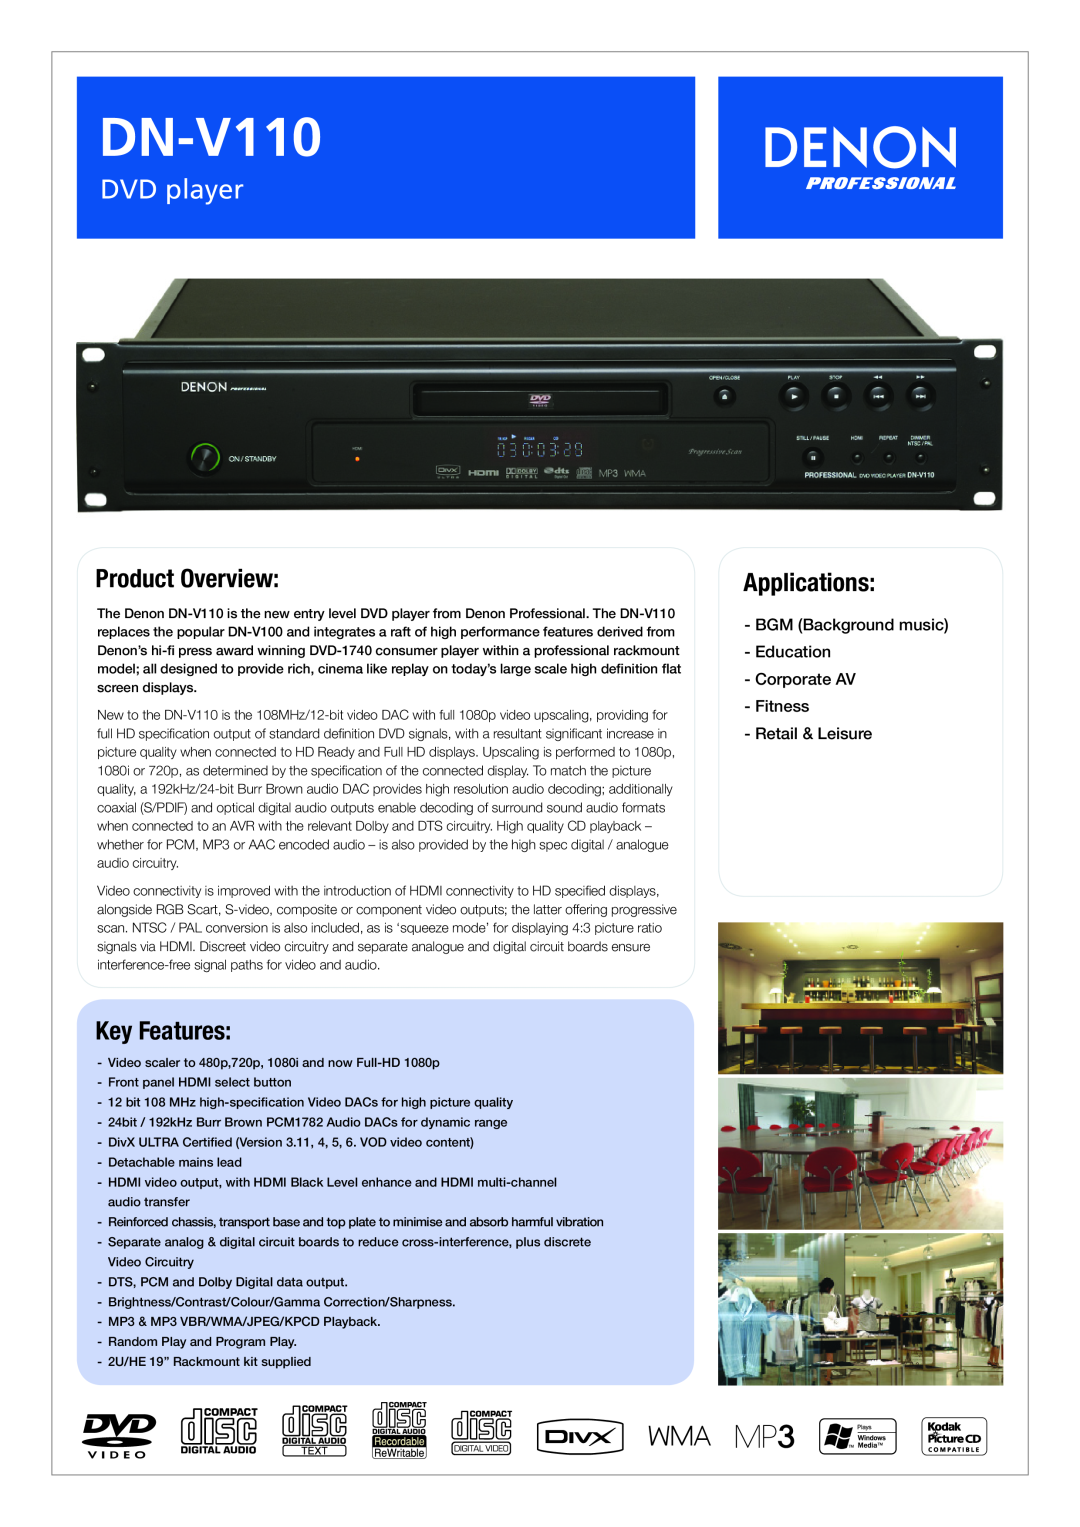 Denon DN-V110 manual DVD player, Product Overview, Key Features, Applications 